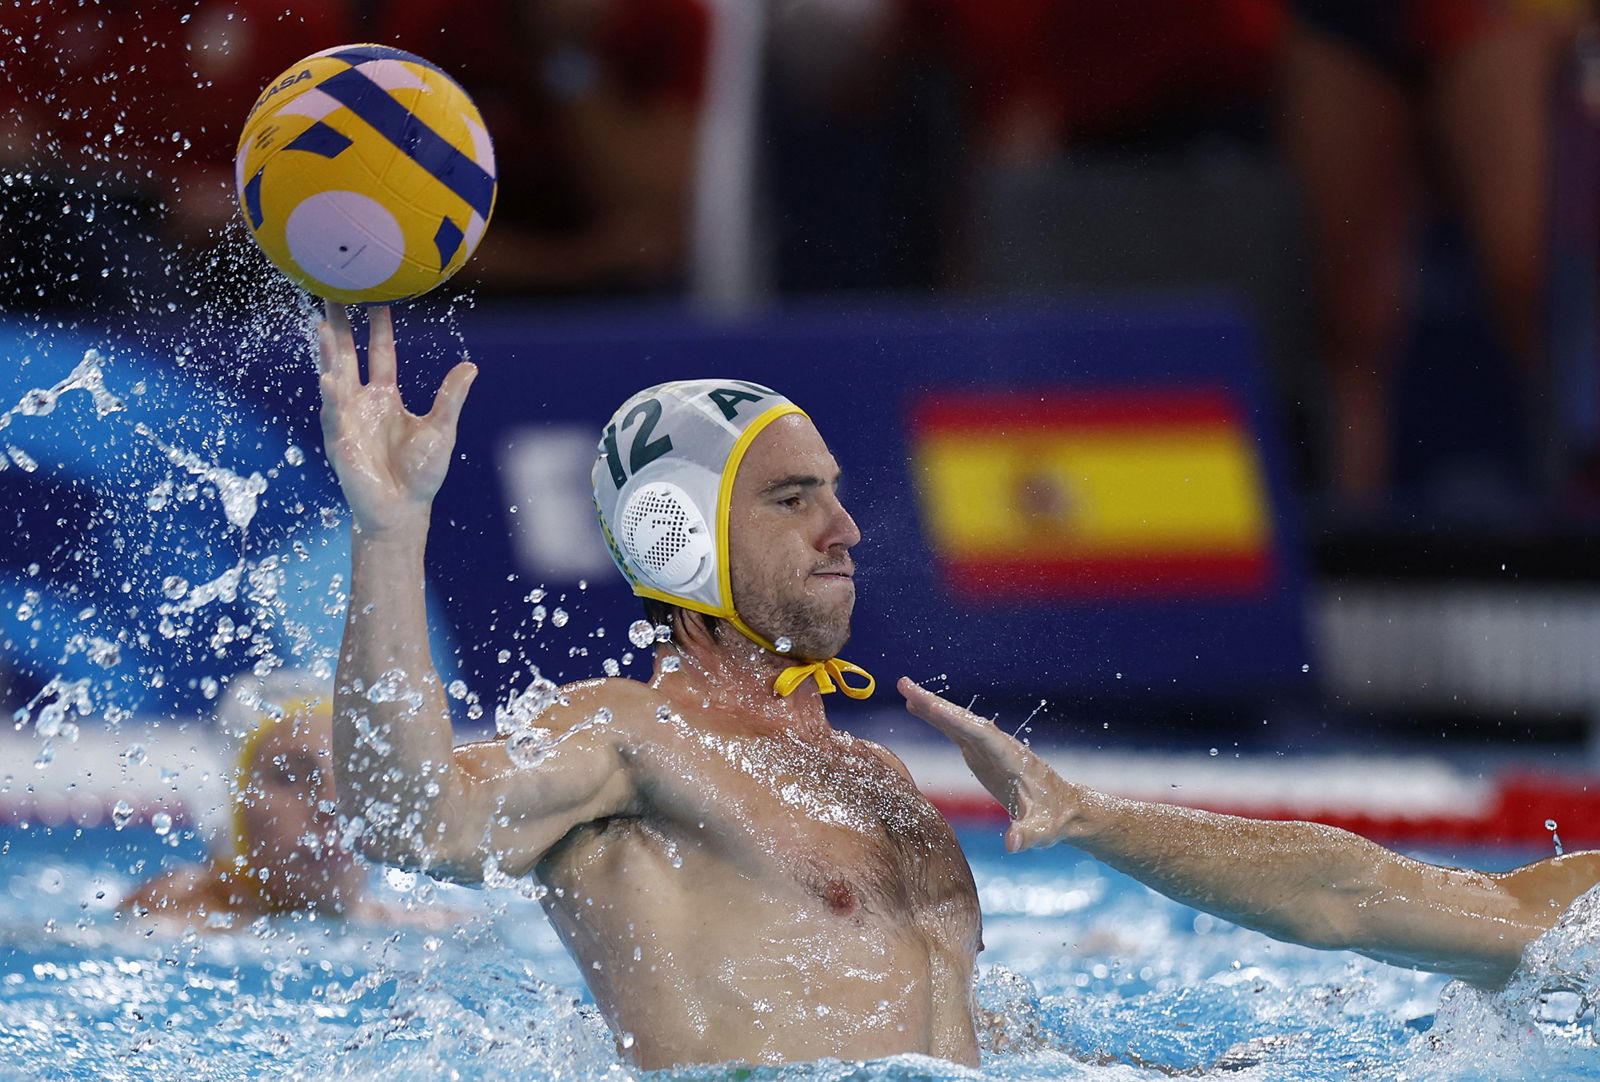 A water polo player, with their upper body out of the water, prepares to catch the ball in the pool